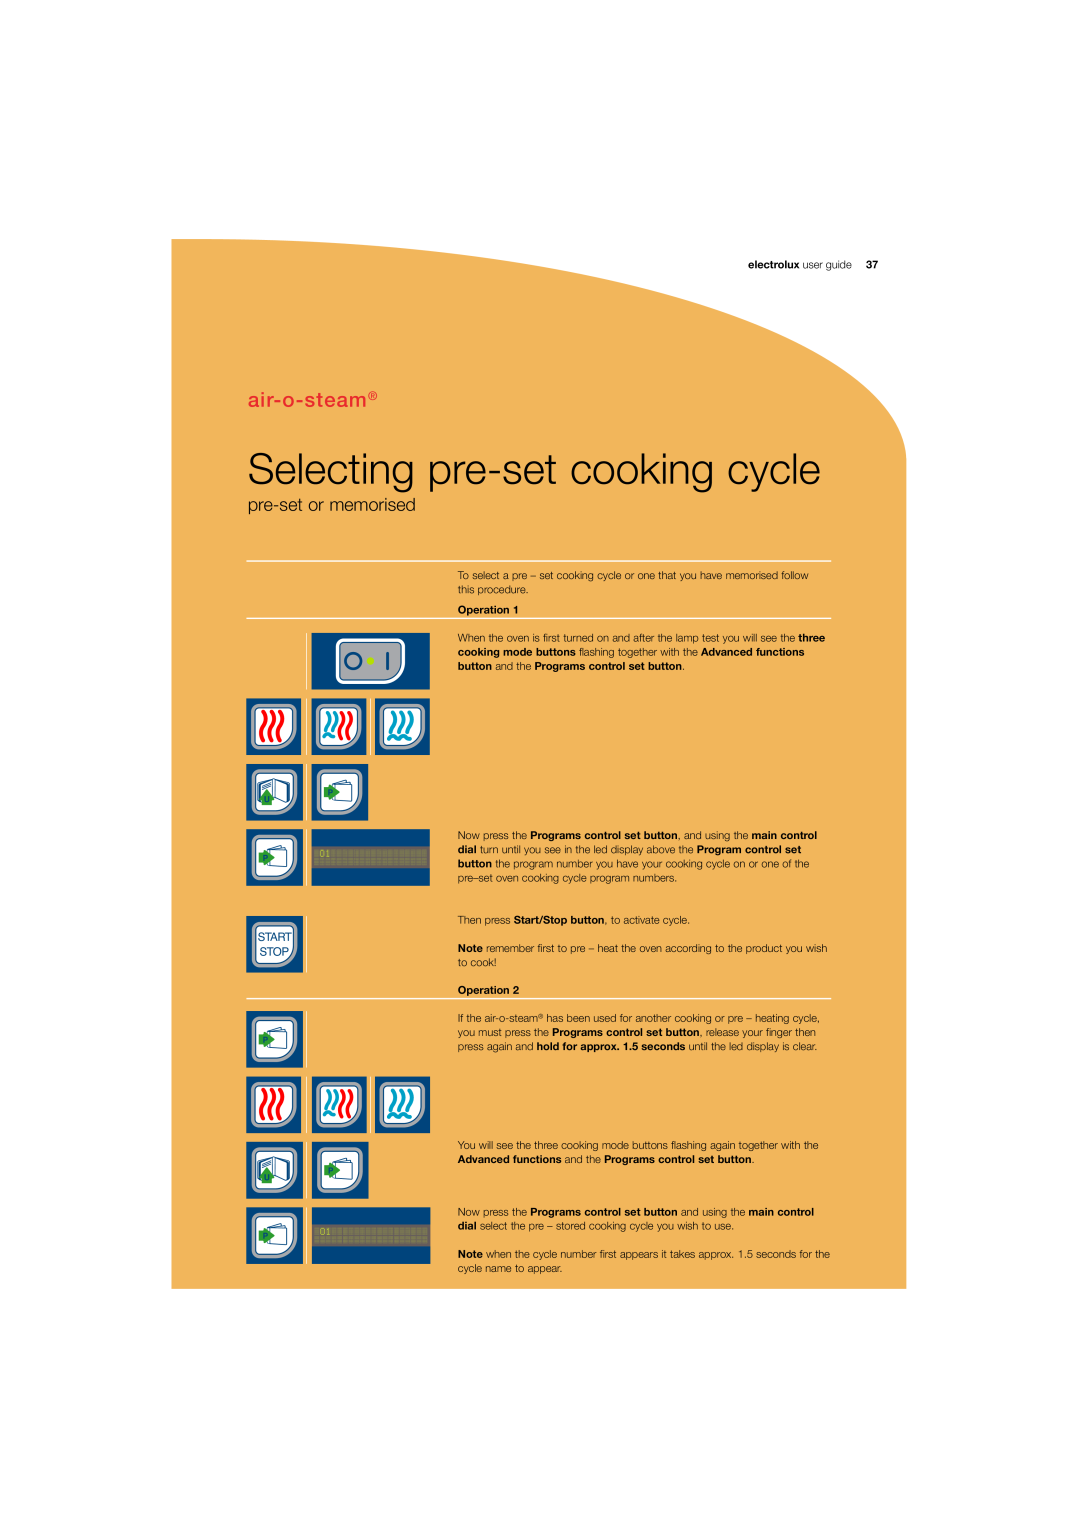 Electrolux 180 manual Selecting pre-set cooking cycle, air-o-steam, pre-set or memorised, electrolux user guide, Operation 